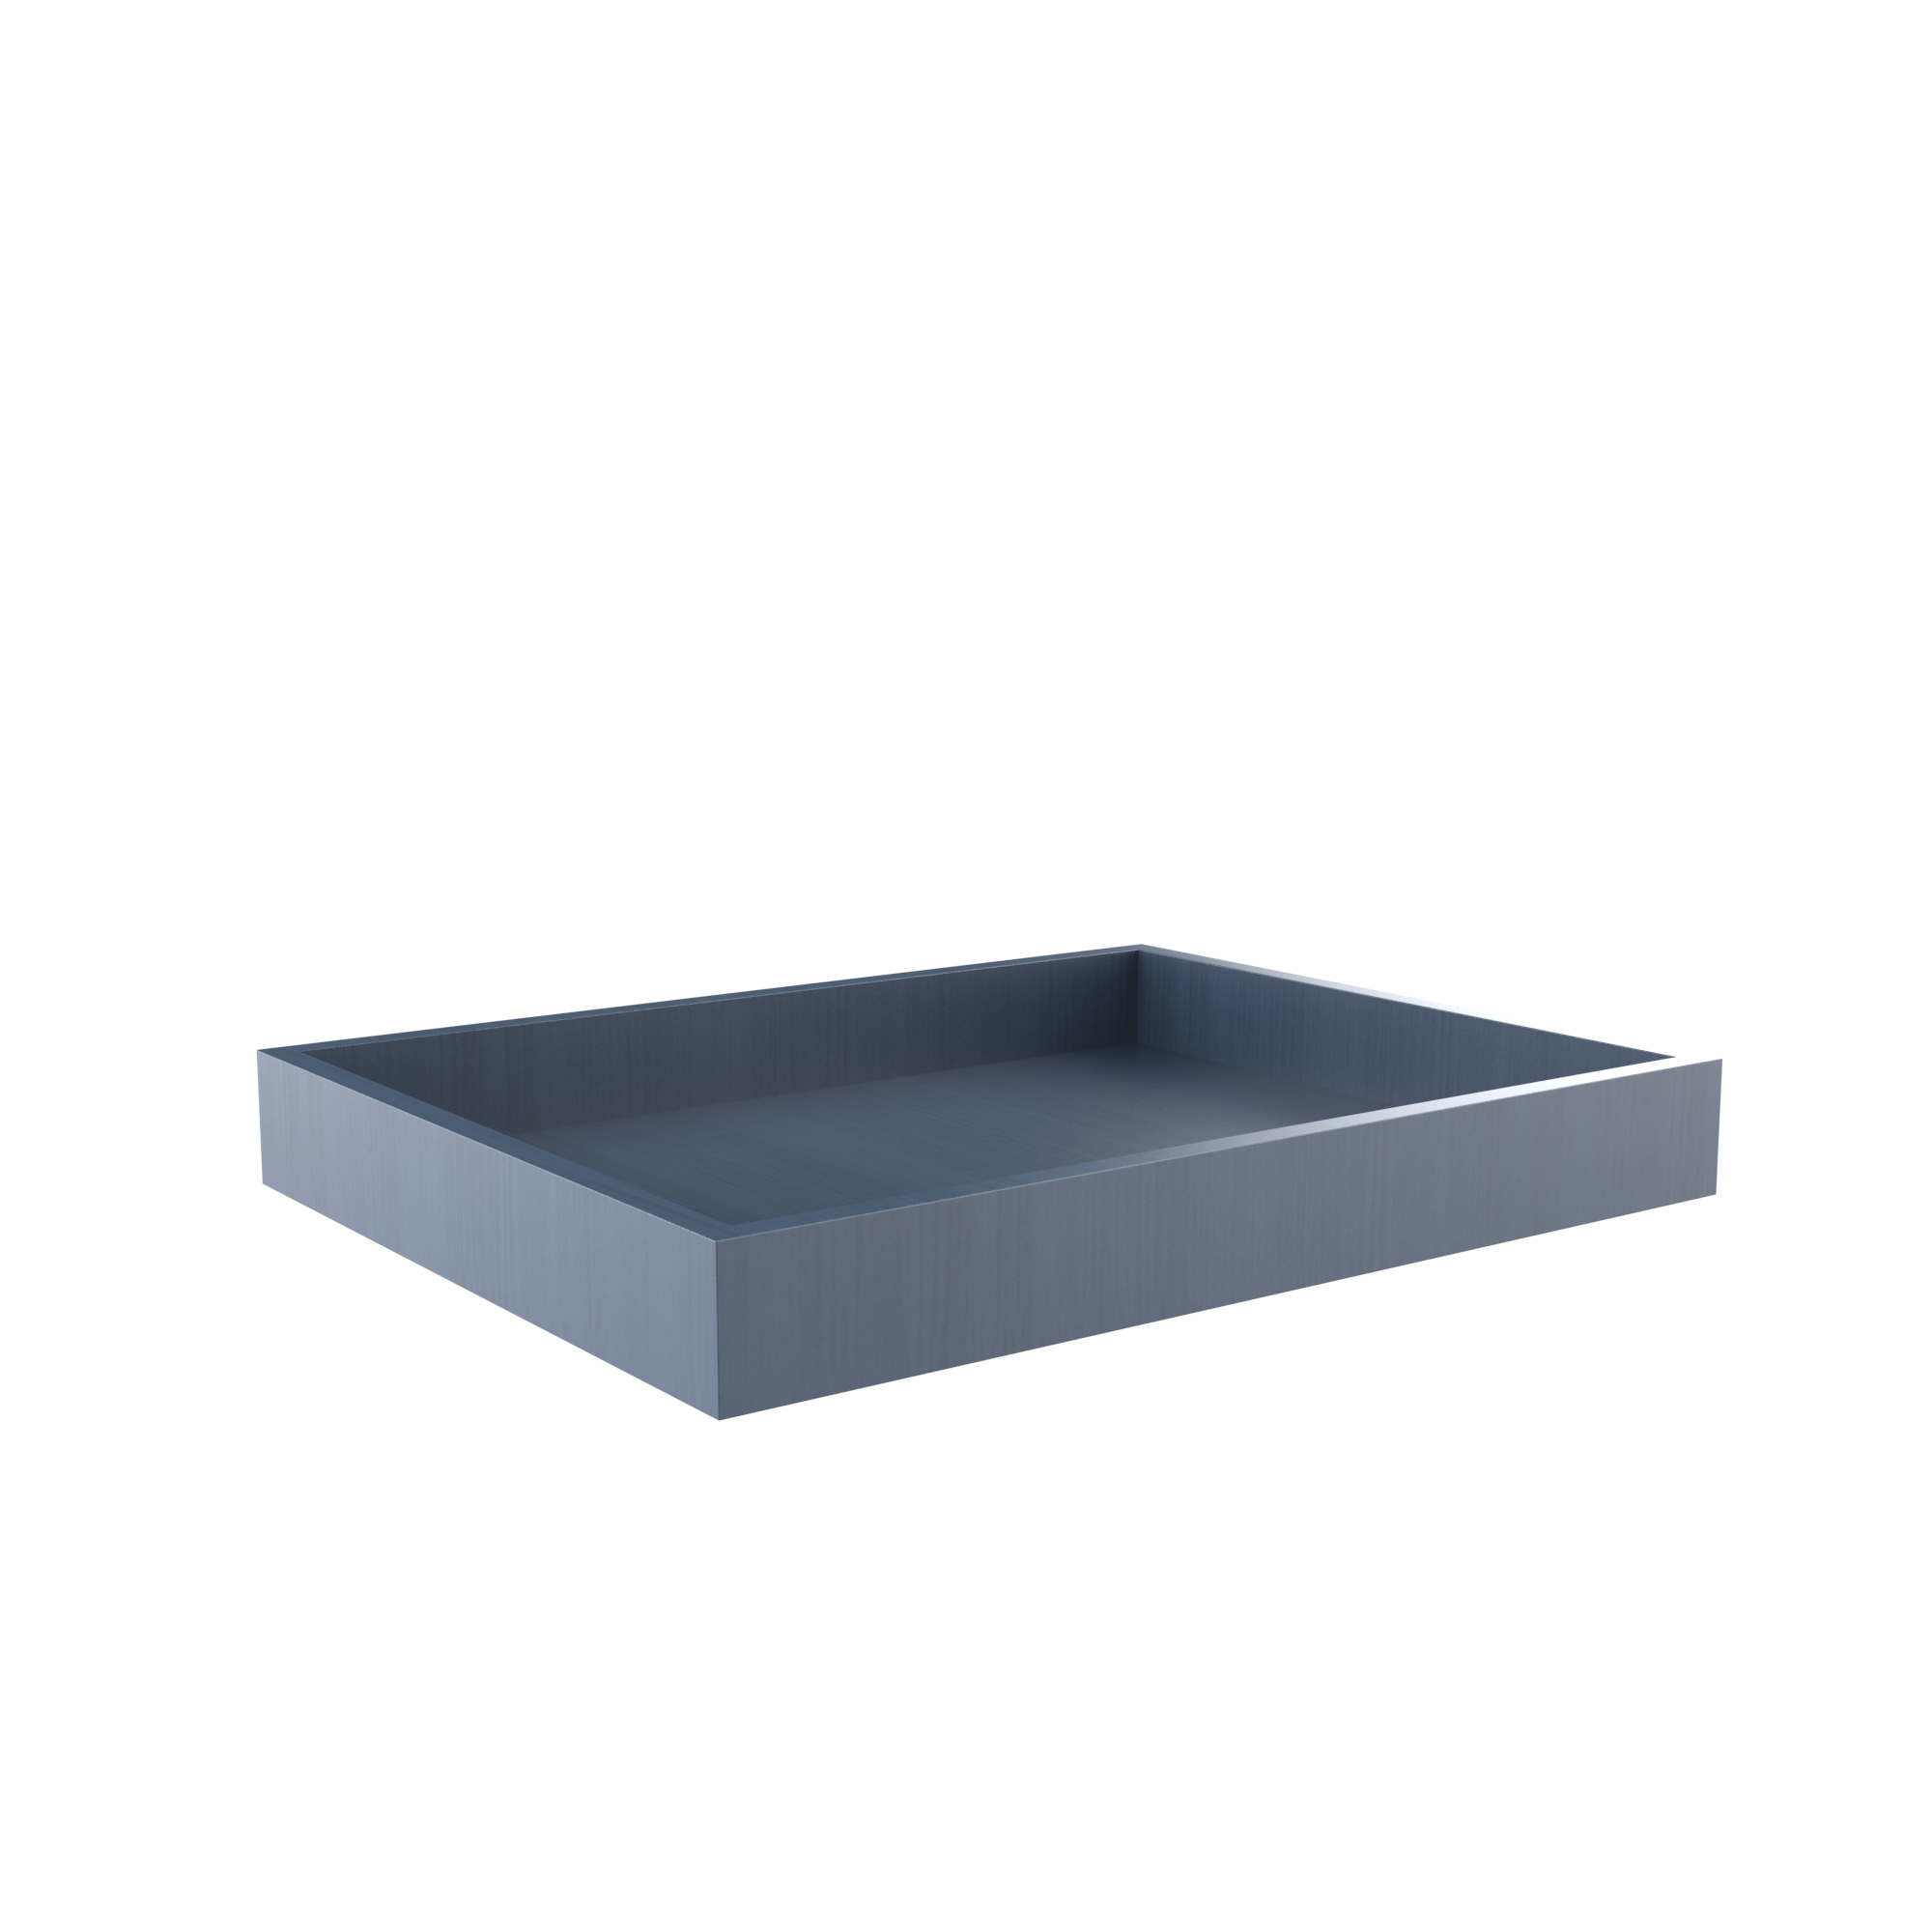 Roll Out Tray for Cabinets - Fits B27 - Blue Shaker Cabinet Cabinet - RTA